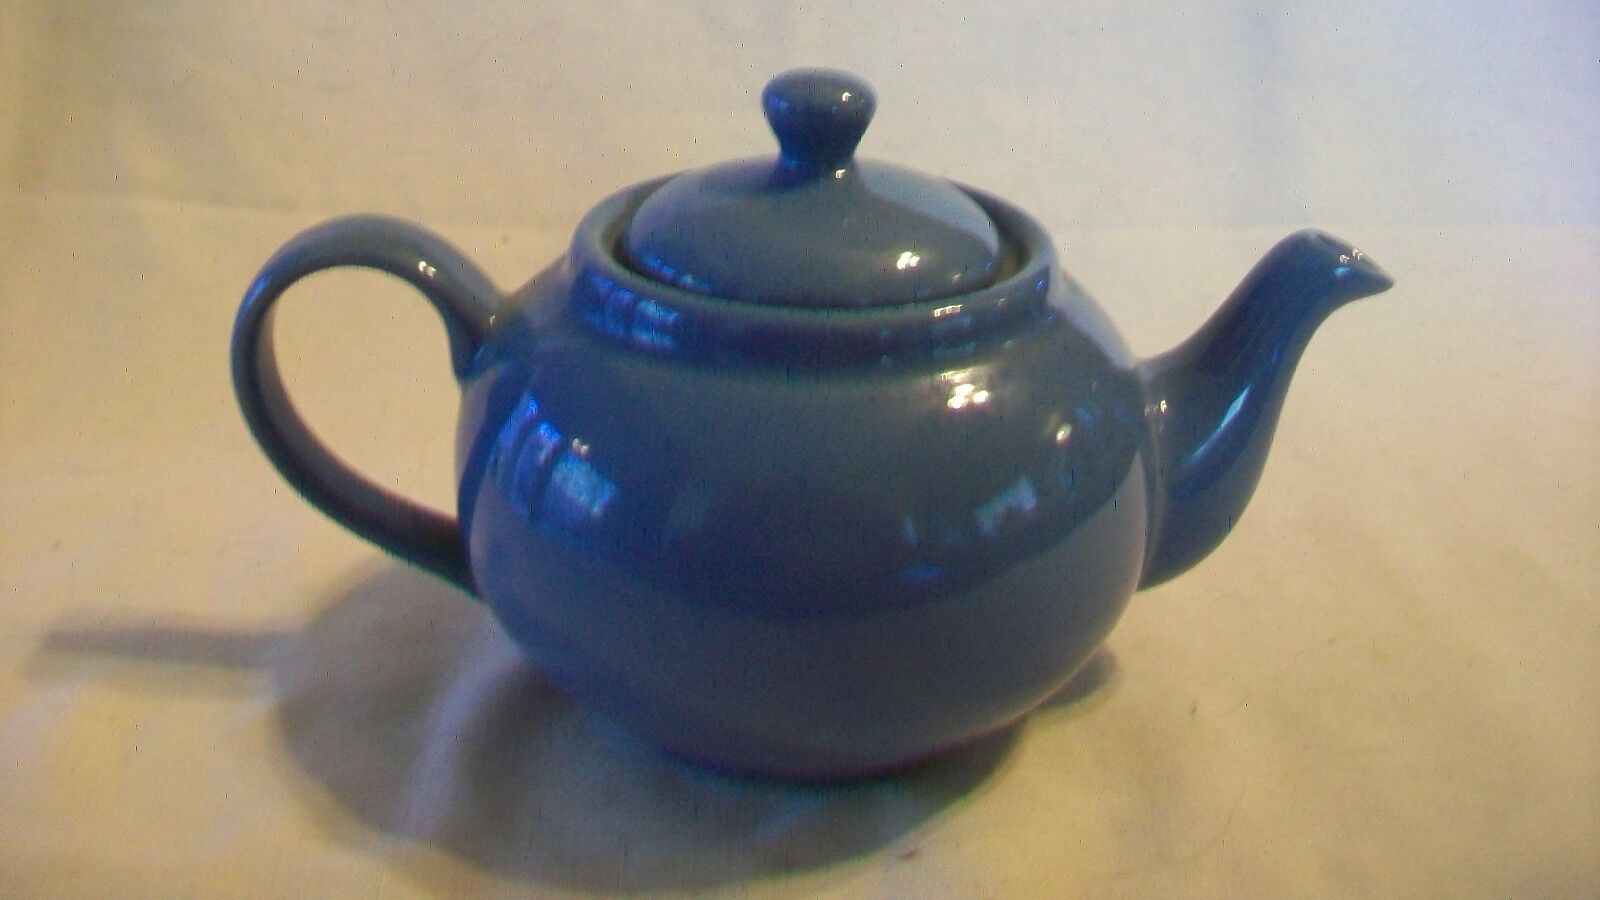 Blue Grey Ceramic Tea Pot from Herman Dodge & Sons, made in Thailand